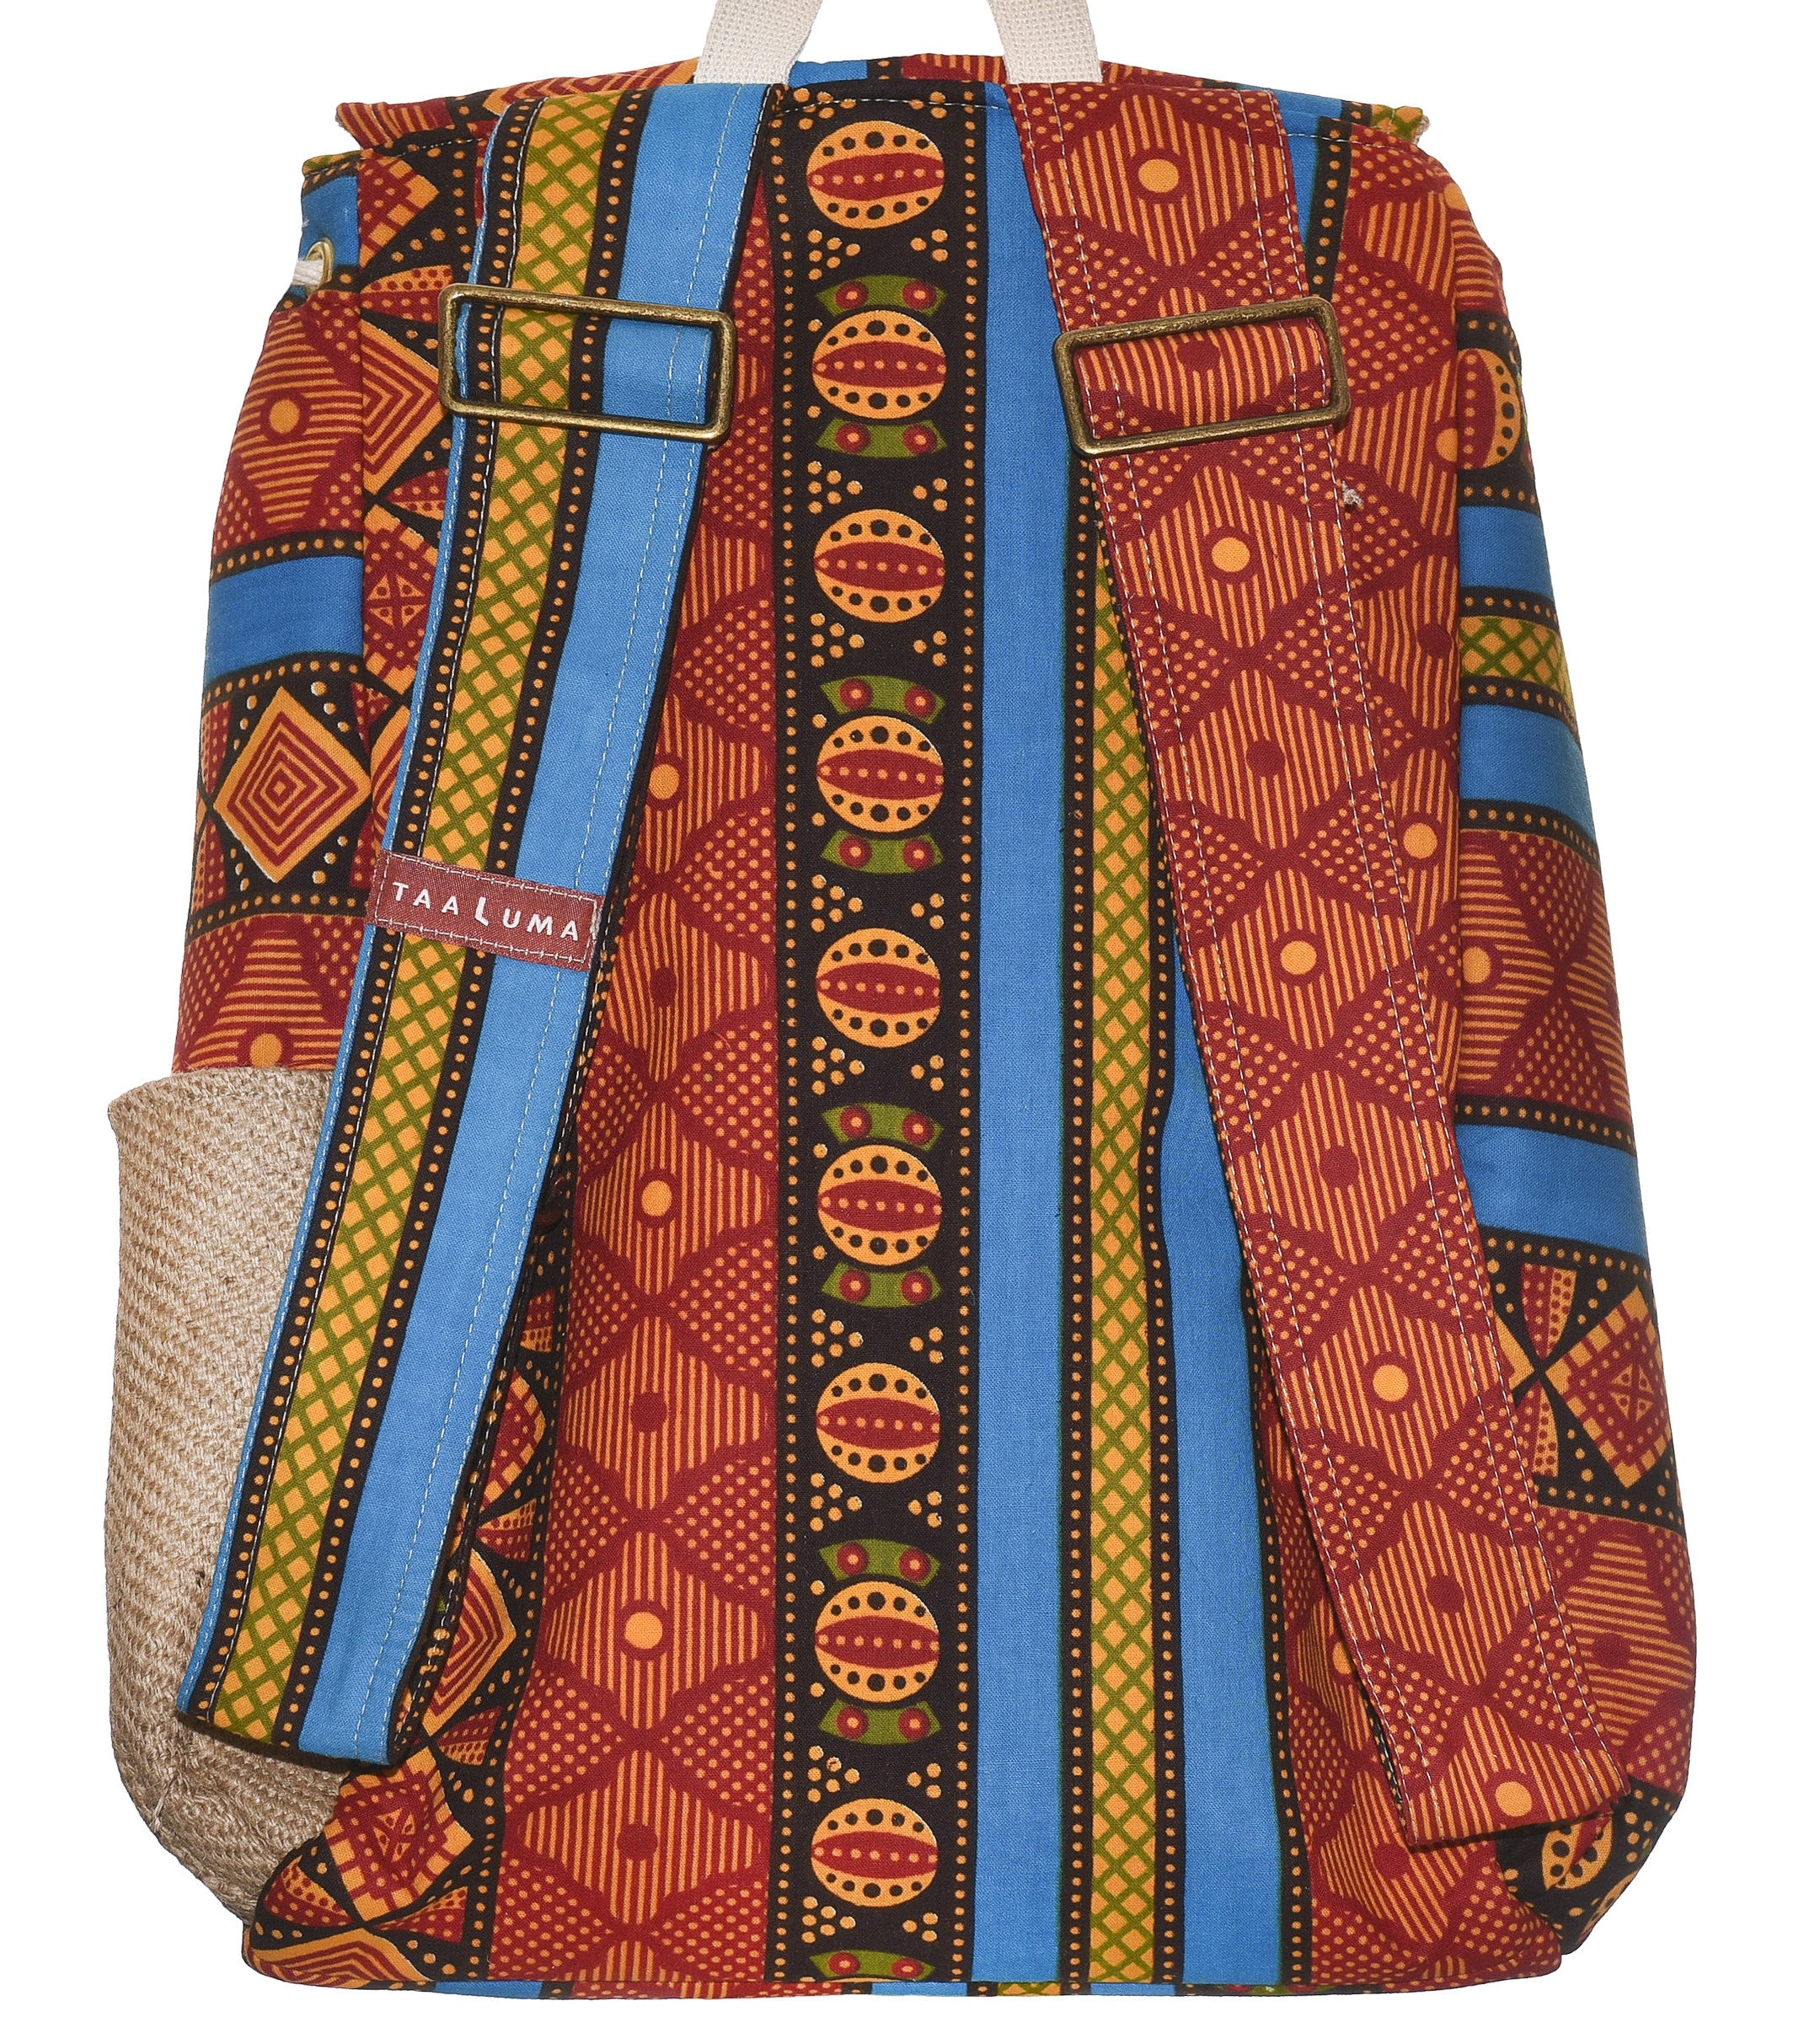 Cameroon Tote (by Danielle Chambers)